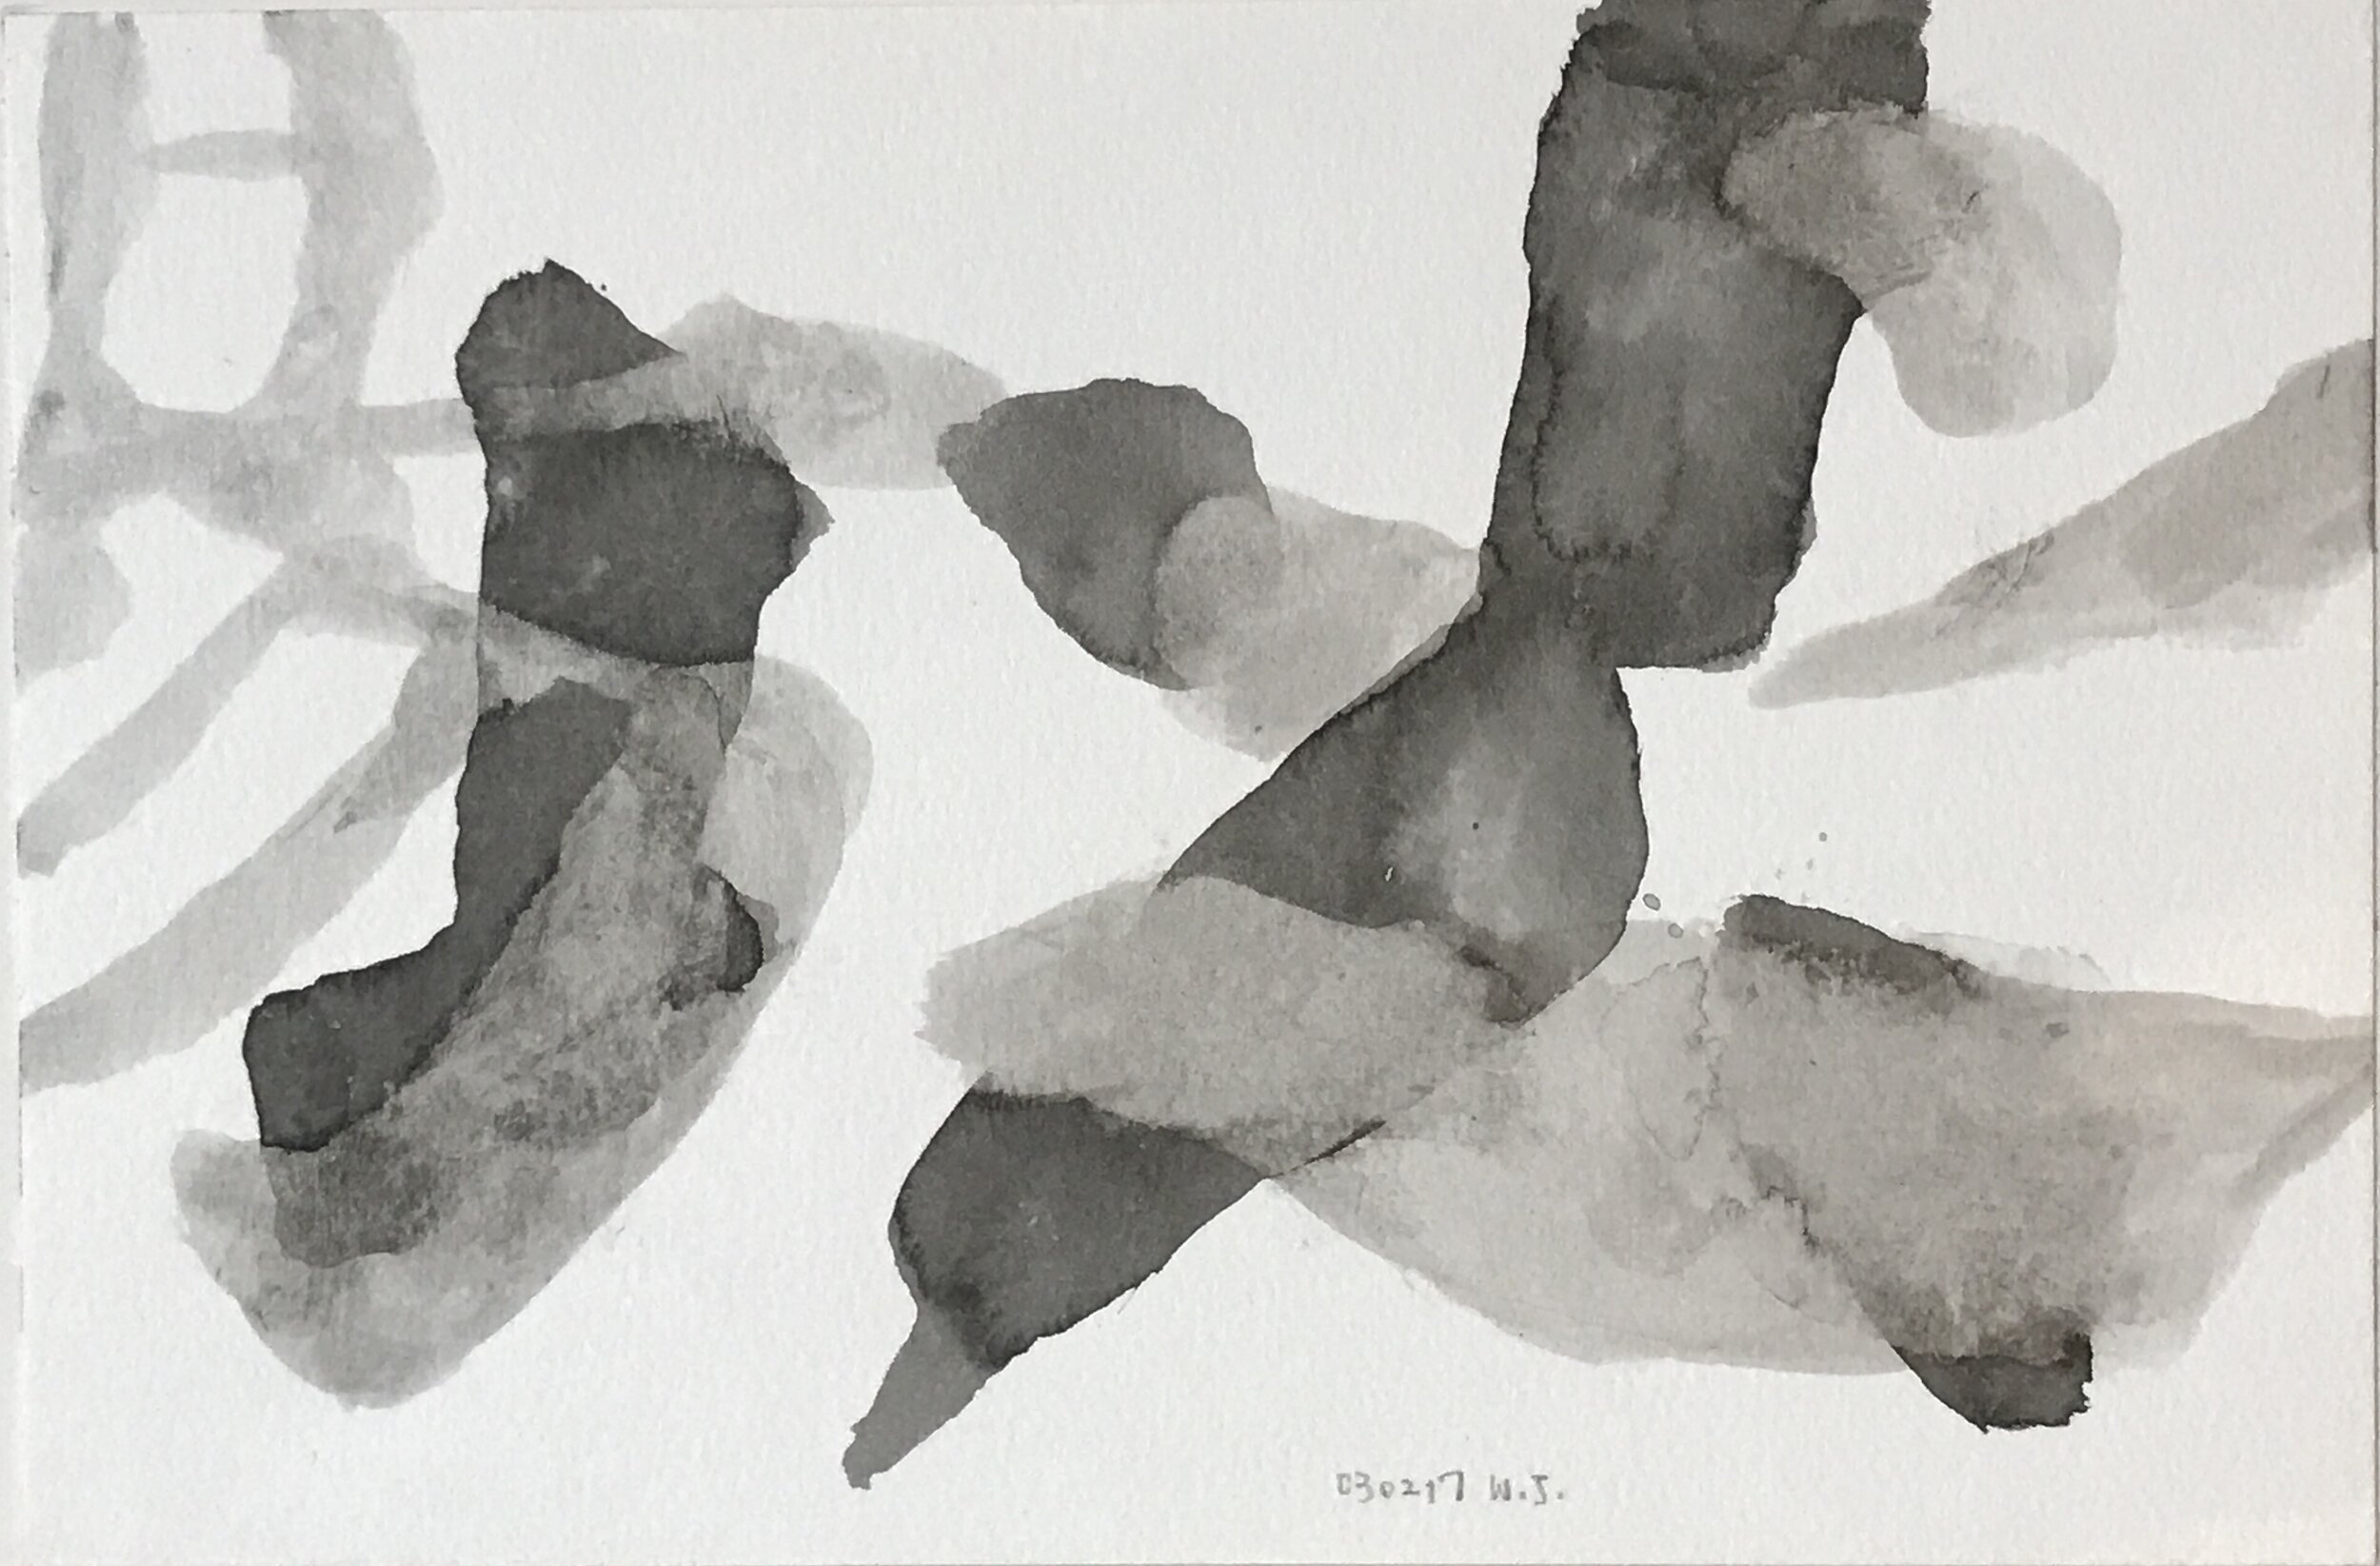  Wei Jia,  S 030217 , 2018. Ink and gouache on paper, 6 x 9 inches ©Wei Jia, courtesy Fou Gallery   